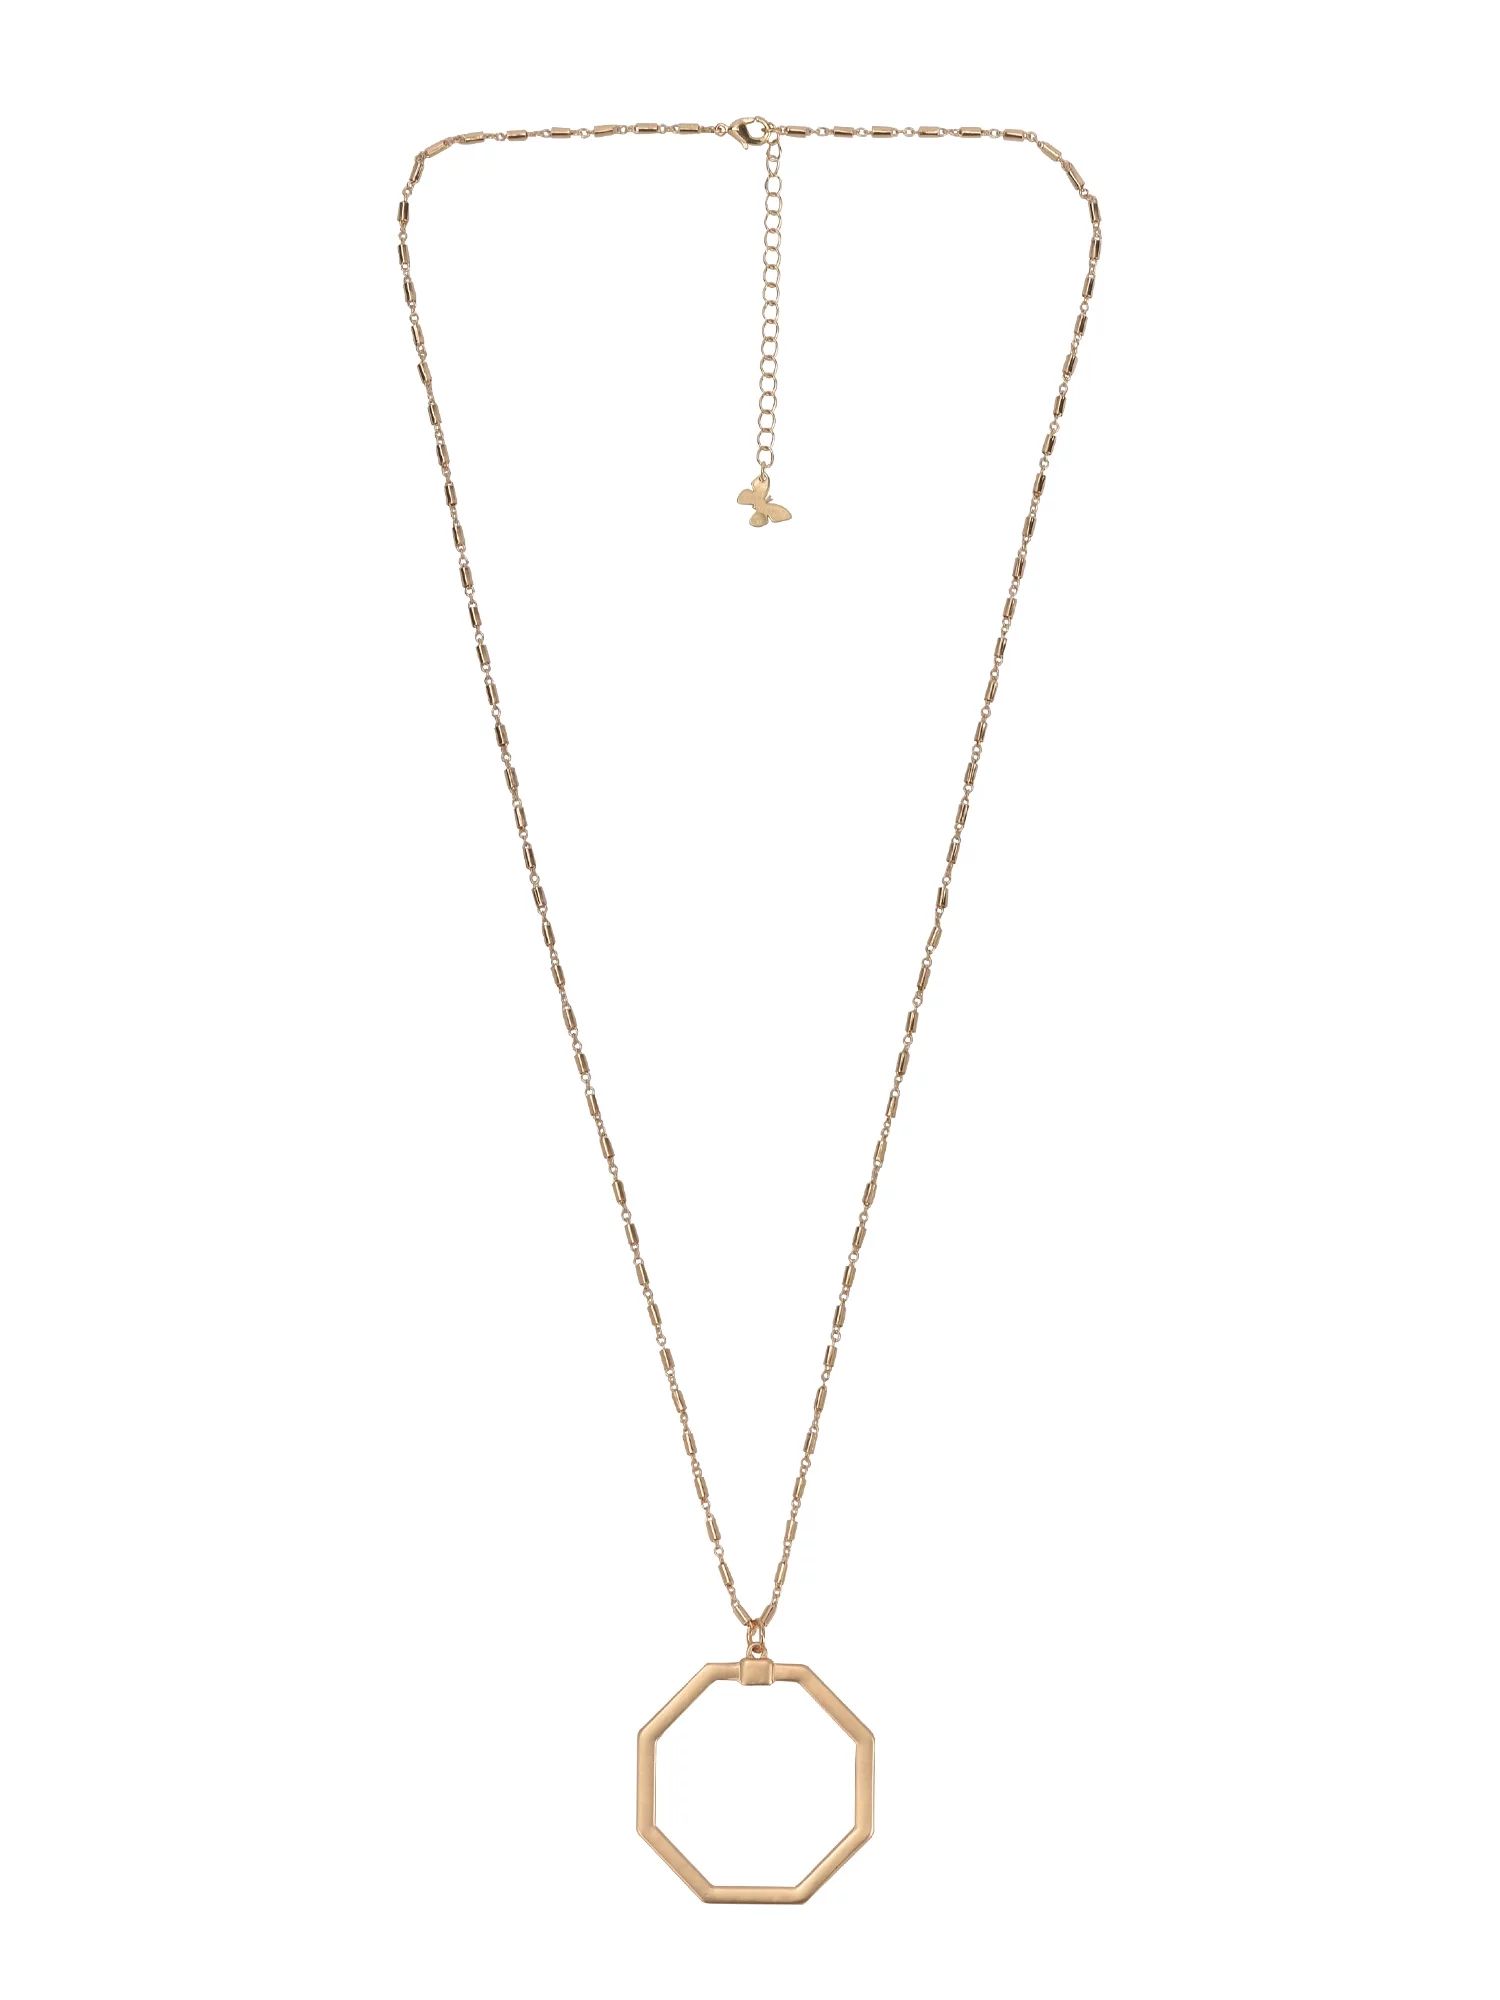 The Pioneer Woman - Women's Jewelry, Soft Gold-tone Octagonal Pendant Necklace | Walmart (US)